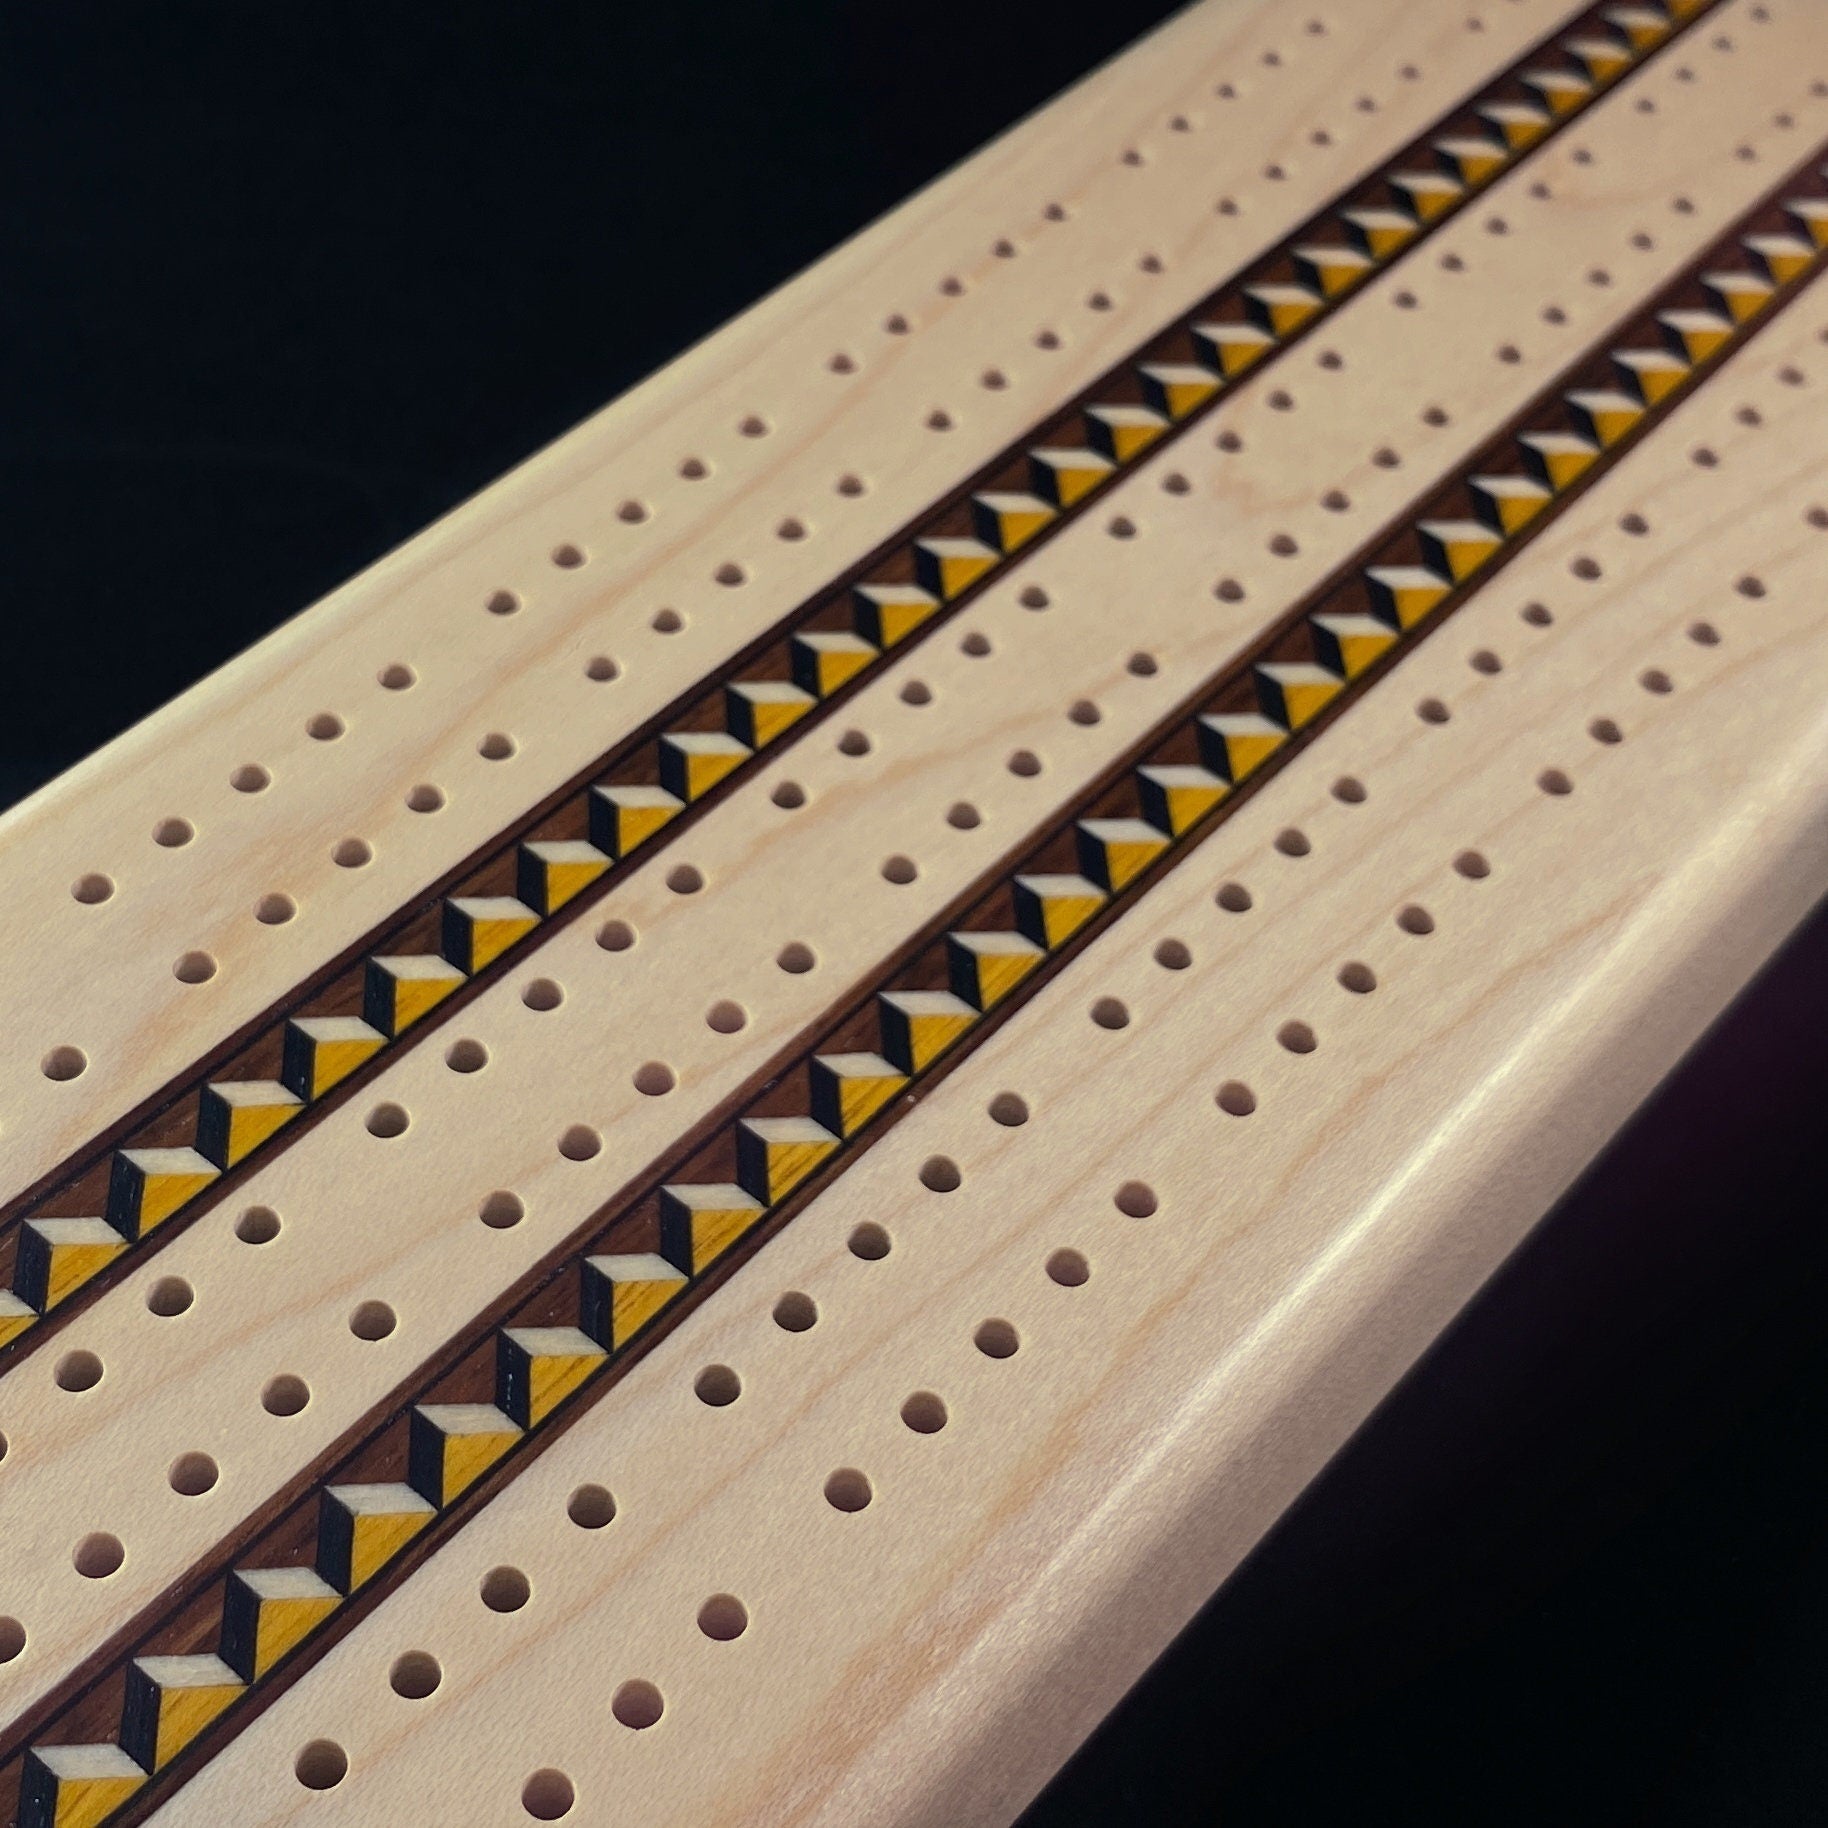 Handmade Wooden Cribbage Board with Cards and Pegs - Maple